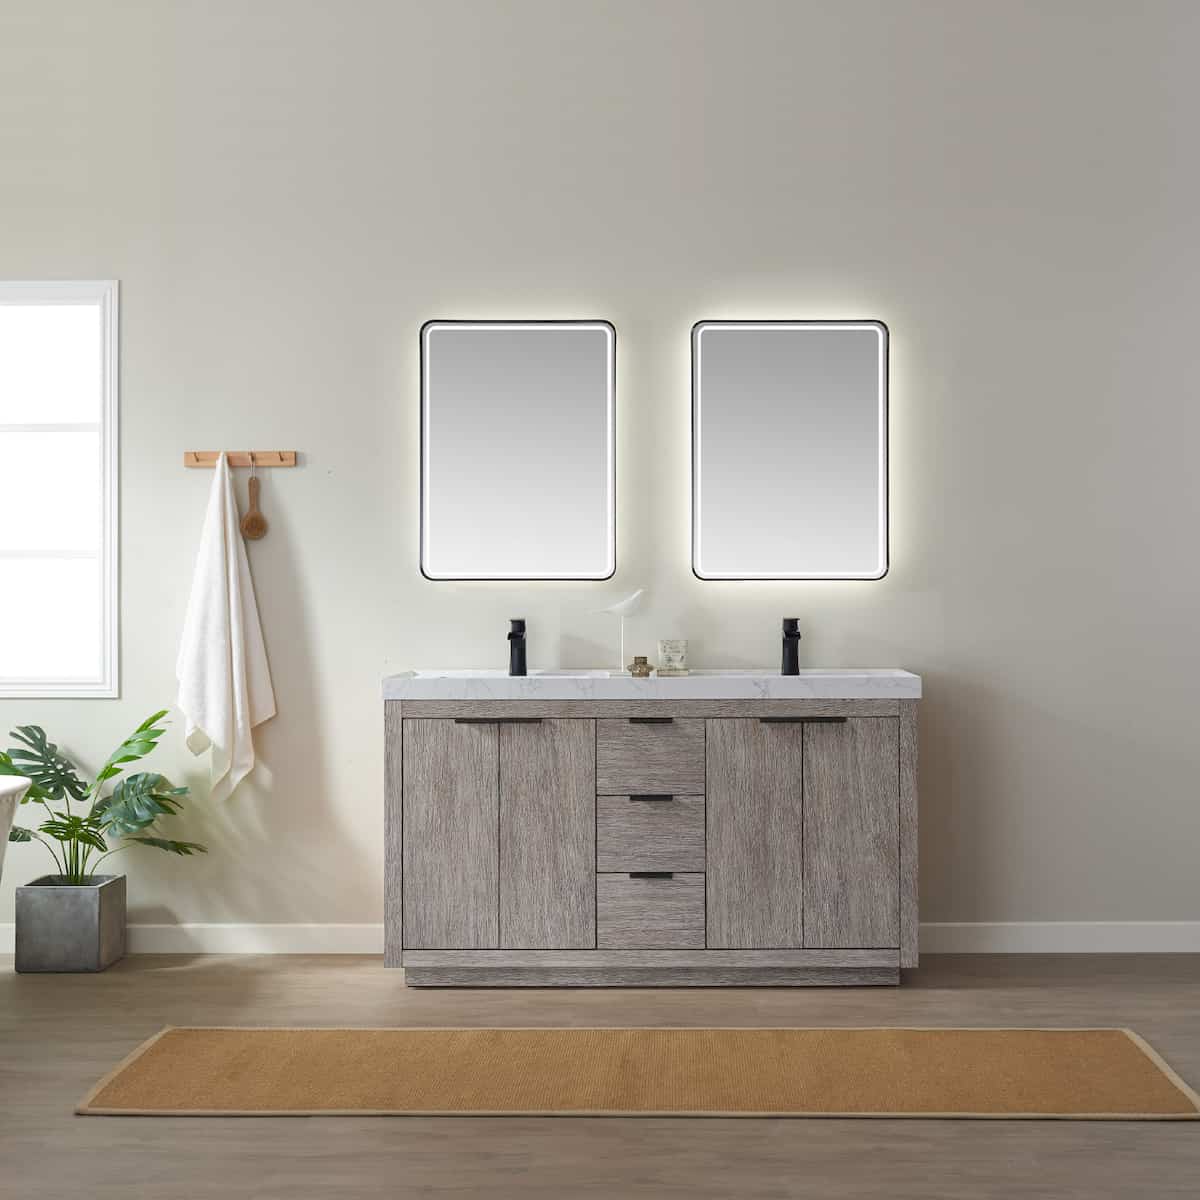 Vinnova Leiza 60 Inch Freestanding Double Vanity in Classical Grey with White Composite Grain Countertop With Mirror in Bathroom 701560-CR-GW